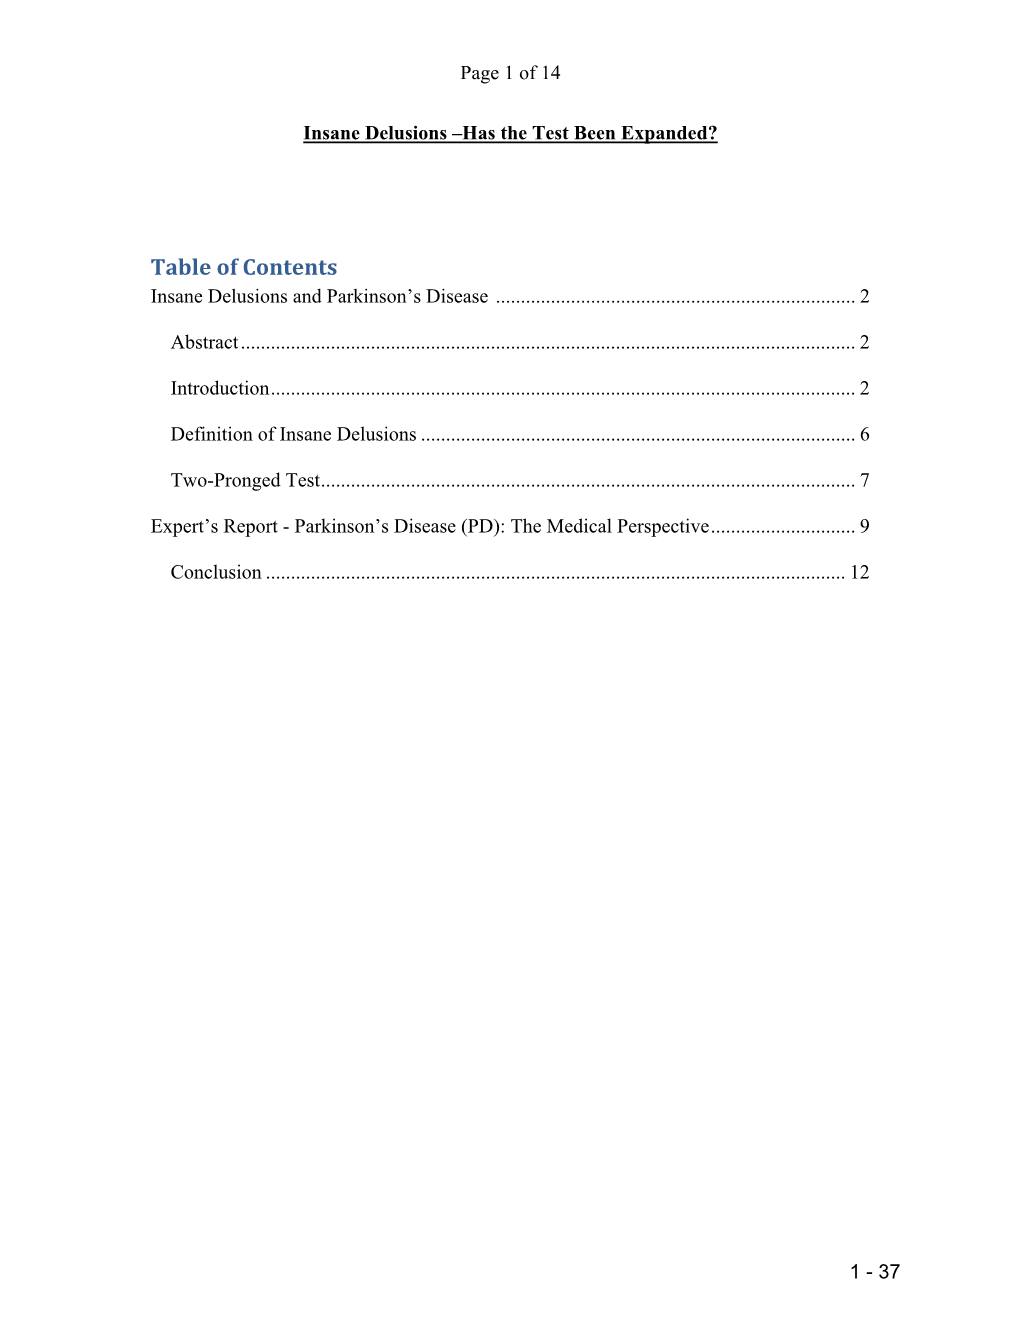 Table of Contents Insane Delusions and Parkinson’S Disease